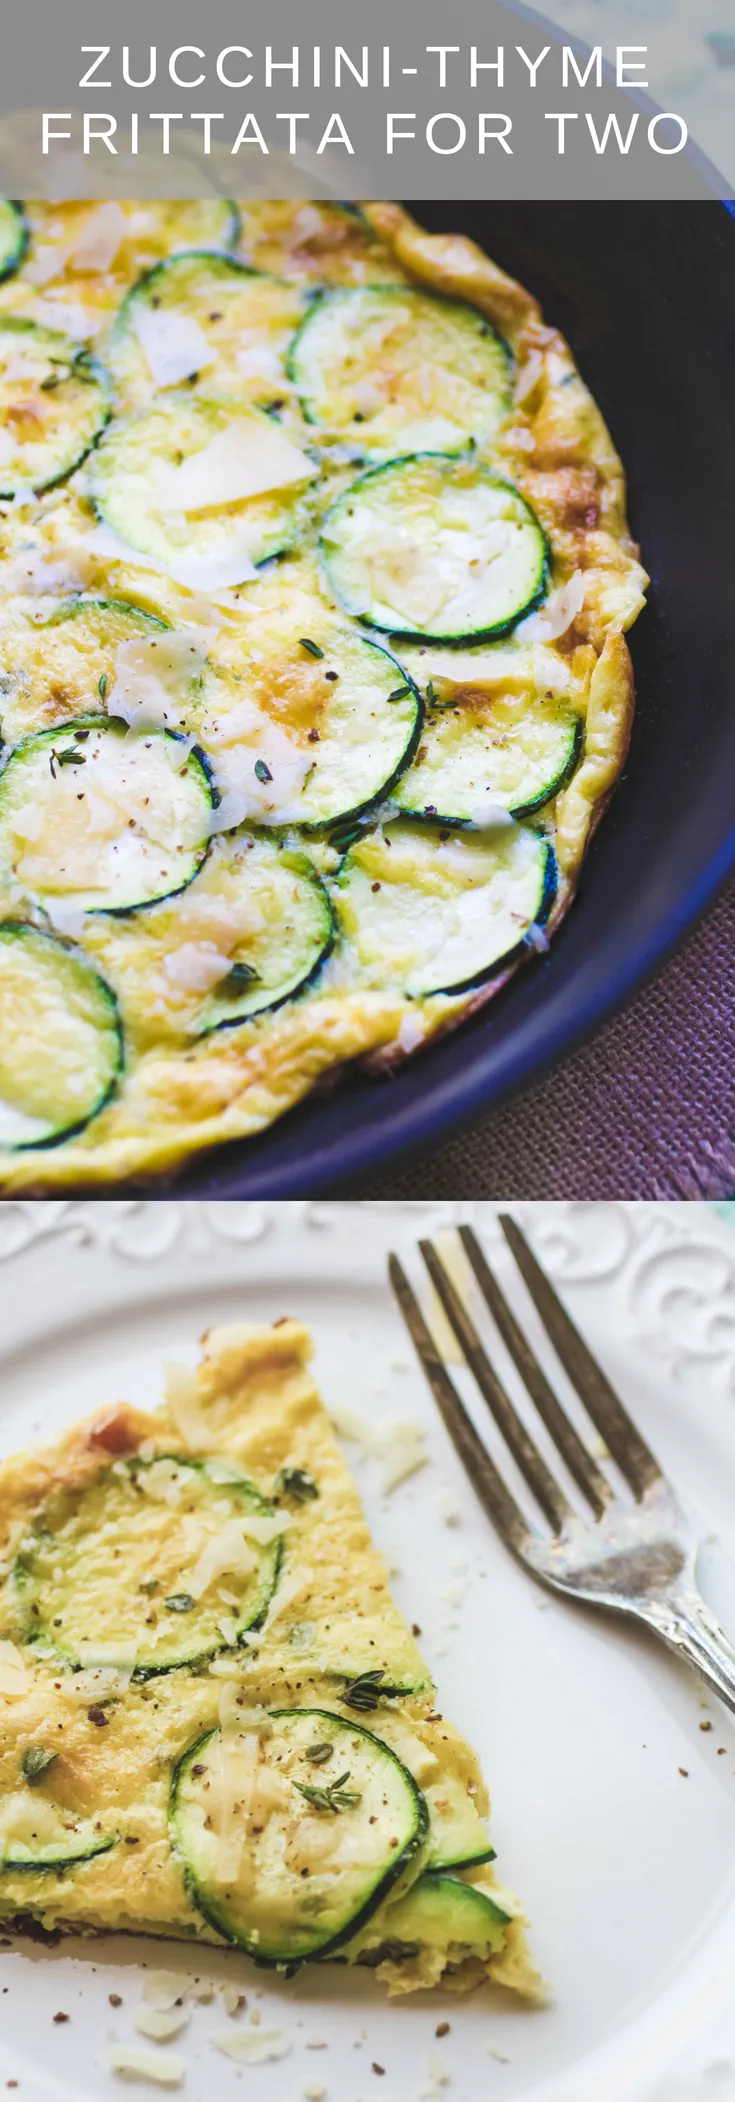 Zucchini-thyme frittata for two makes a fabulous and easy-to-make breakfast. Zucchini-thyme frittata for two is great for an easy breakfast or dinner dish!